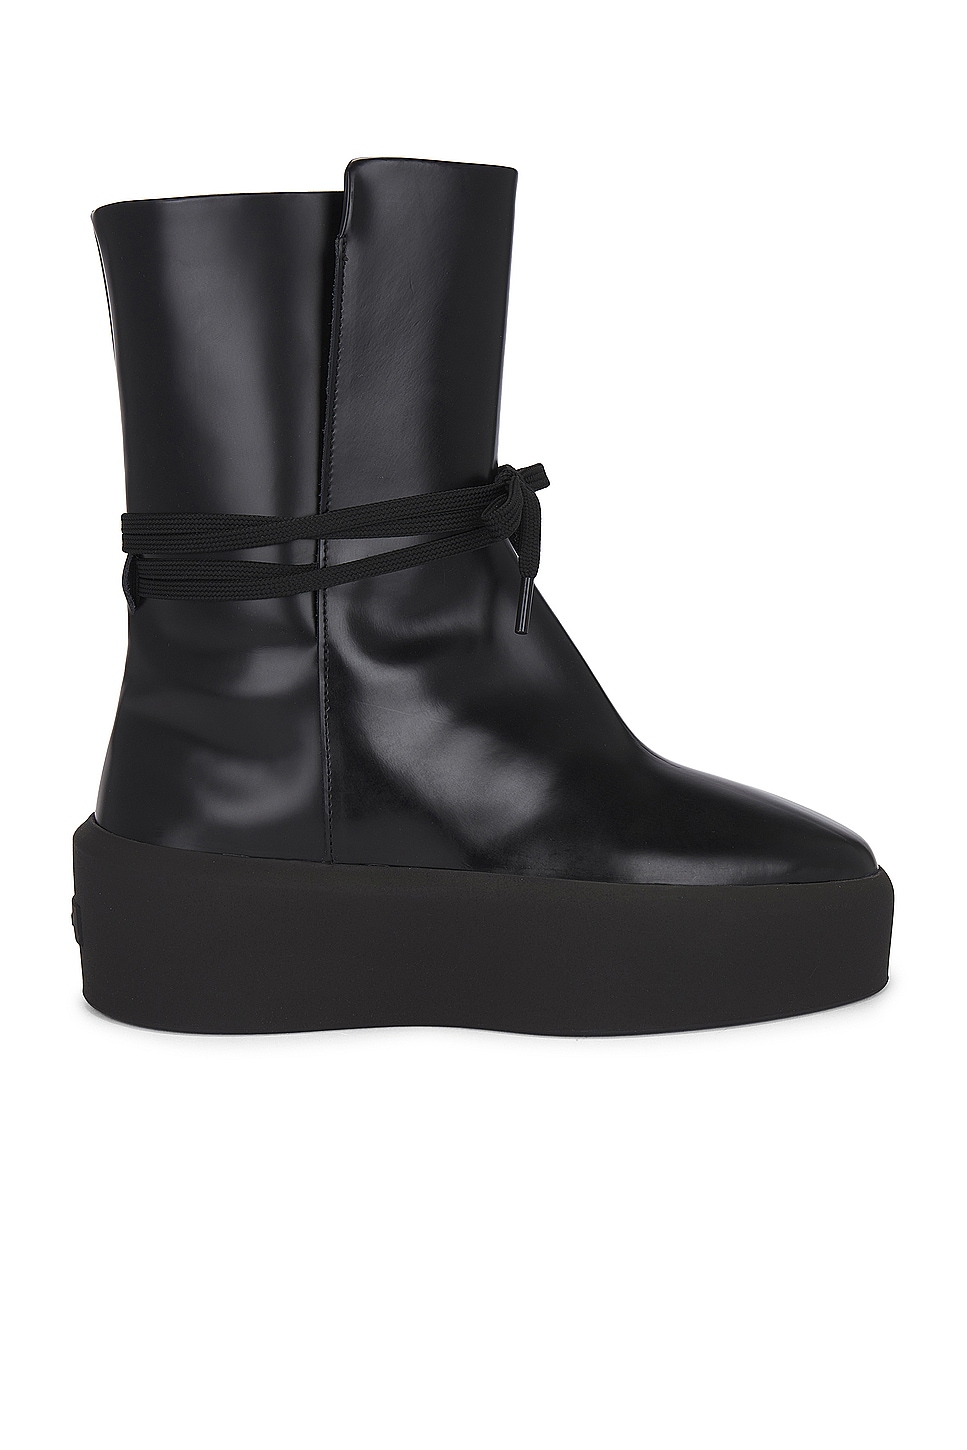 Image 1 of Fear of God Native Boot in Black